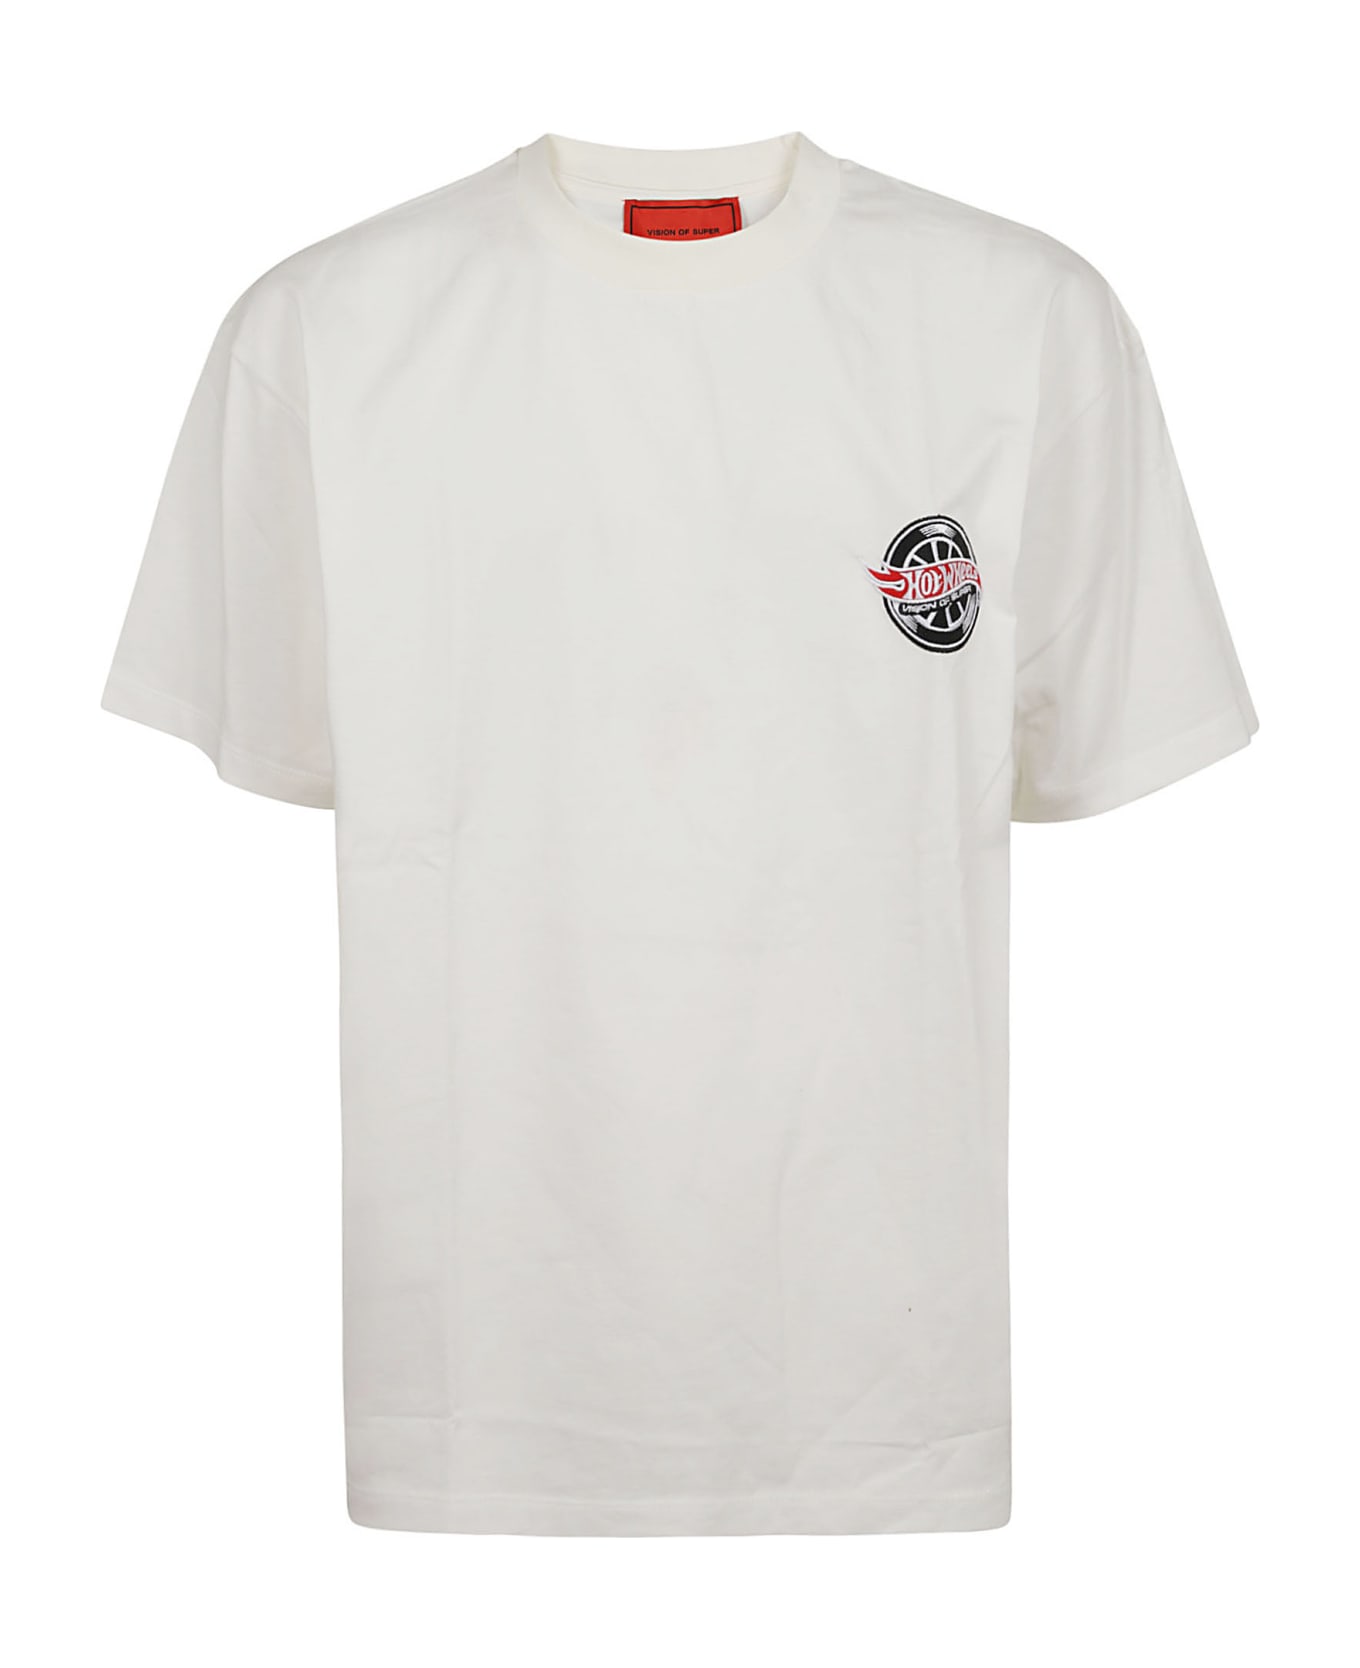 Vision of Super White T-shirt With Red Car Print - White